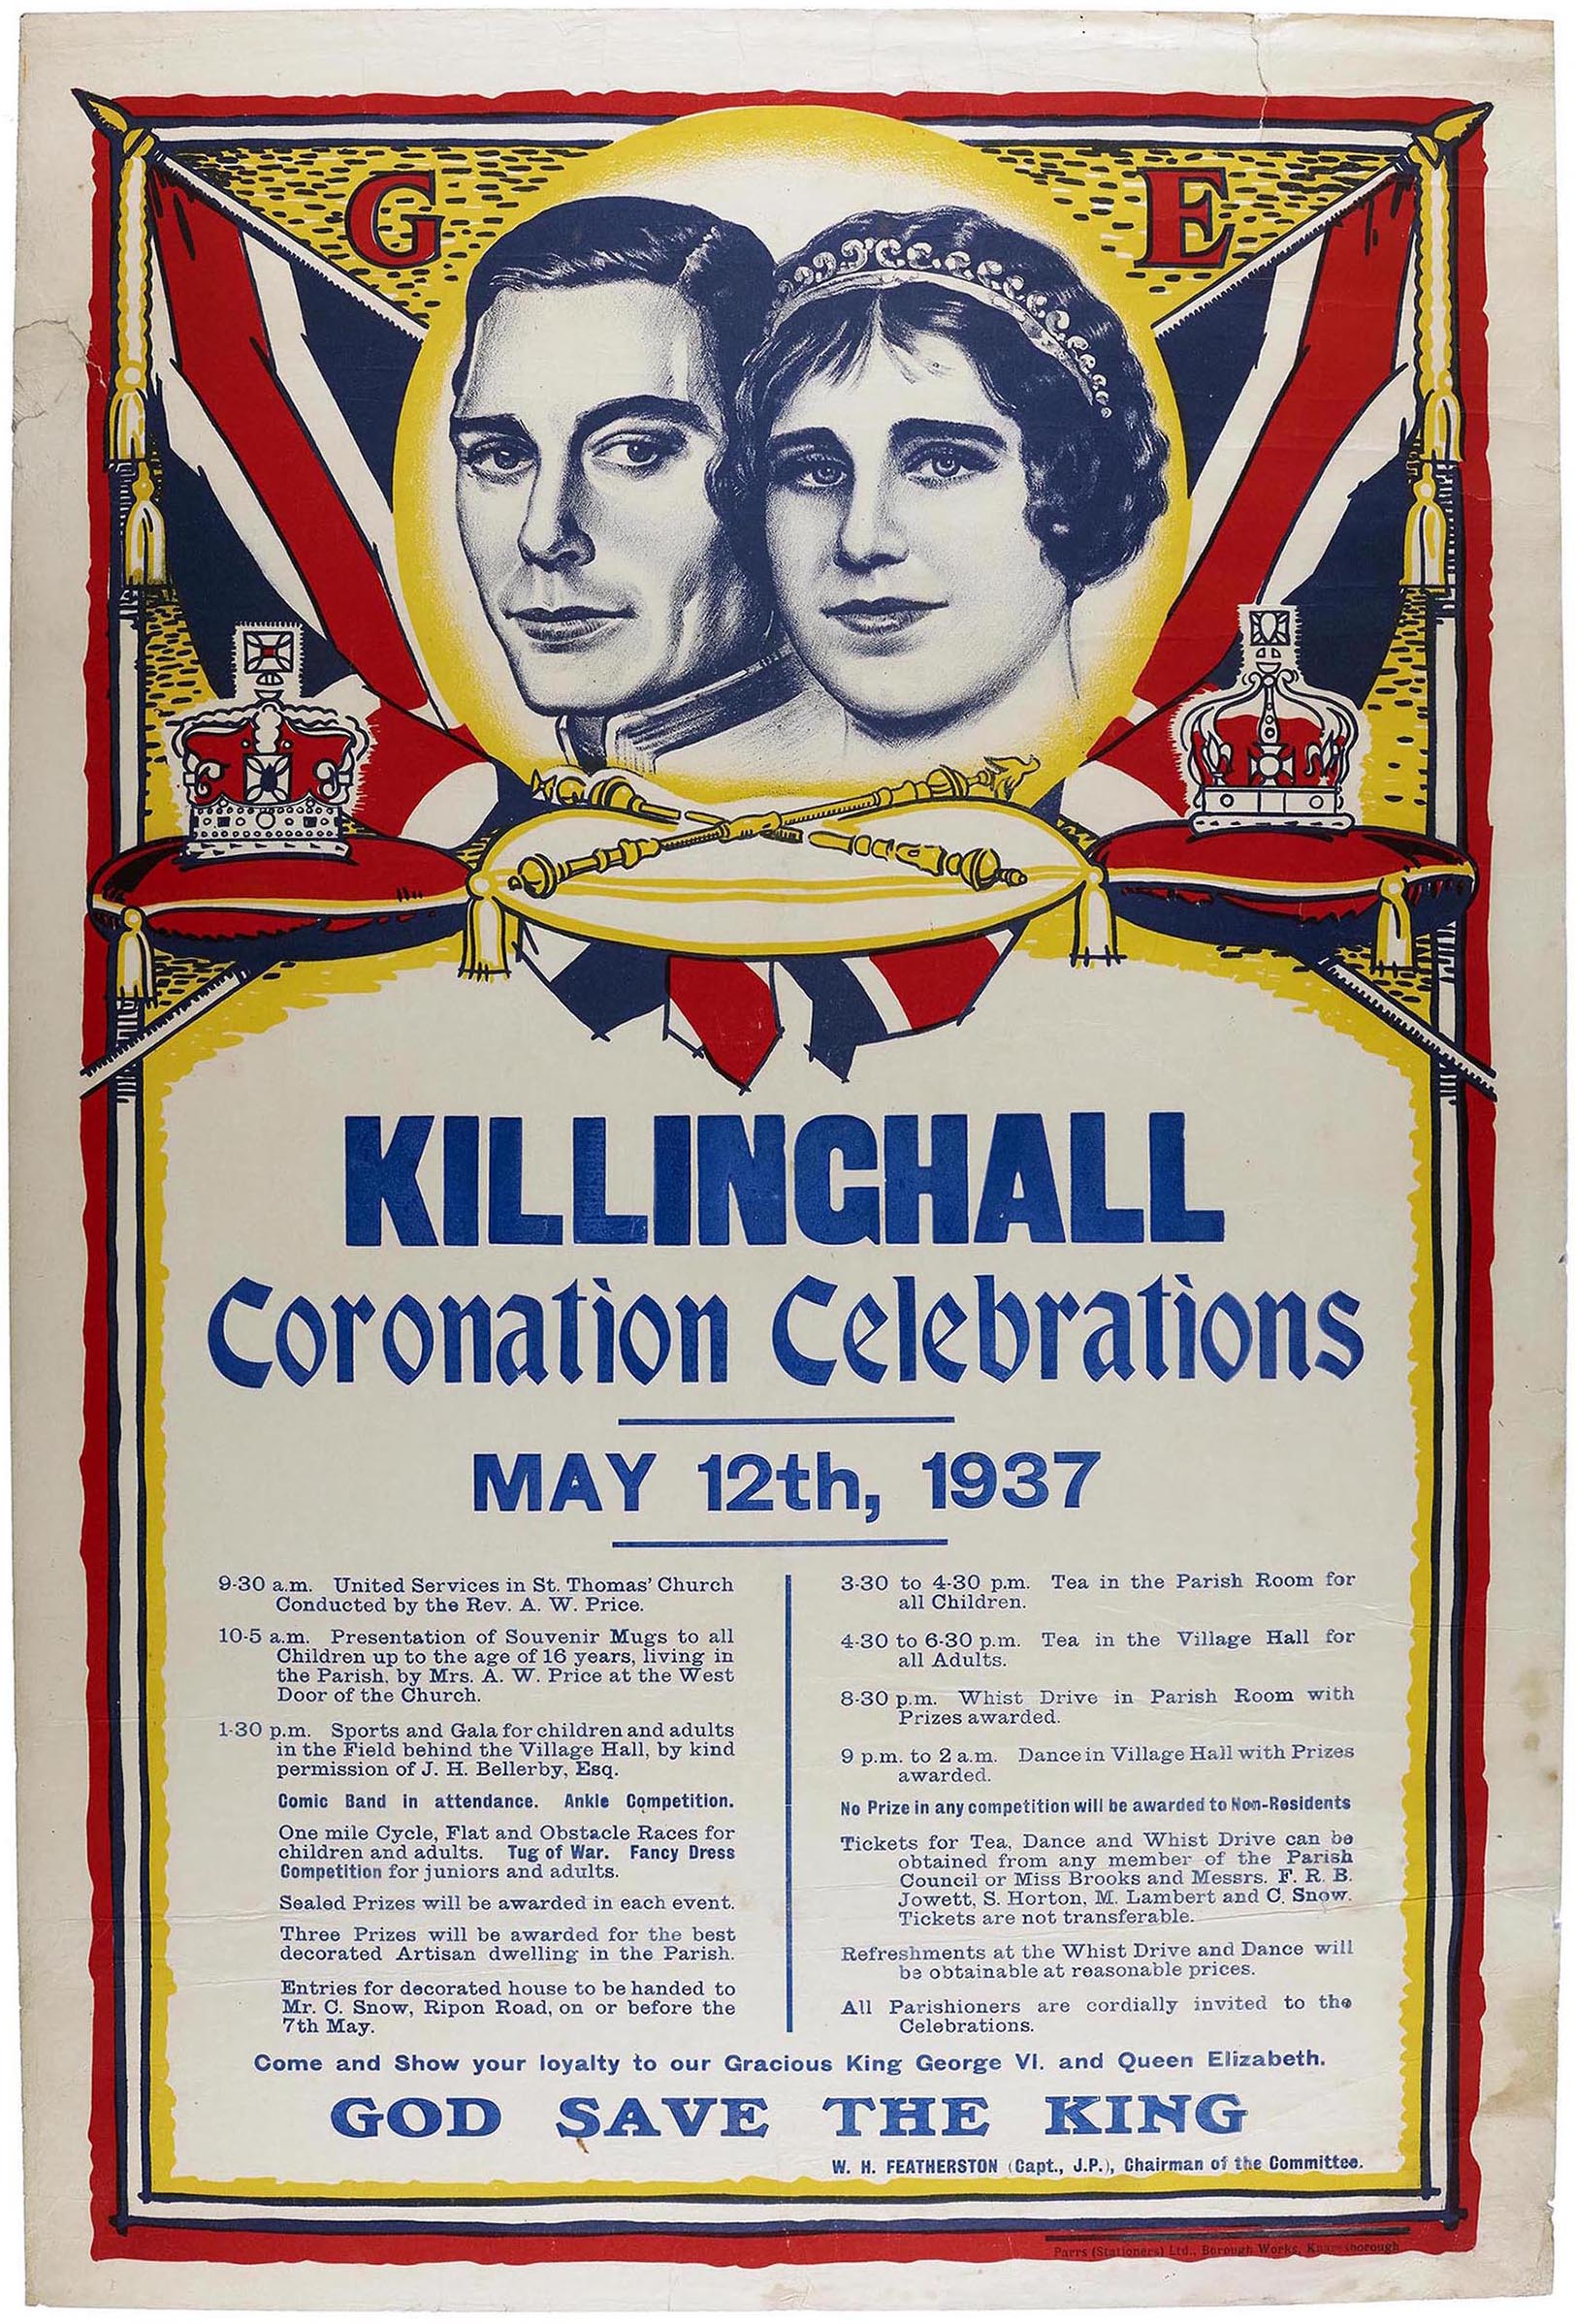 A poster advertising celebrations to mark the Coronation of George VI in 1937, from the Killinghall Parish Council collection